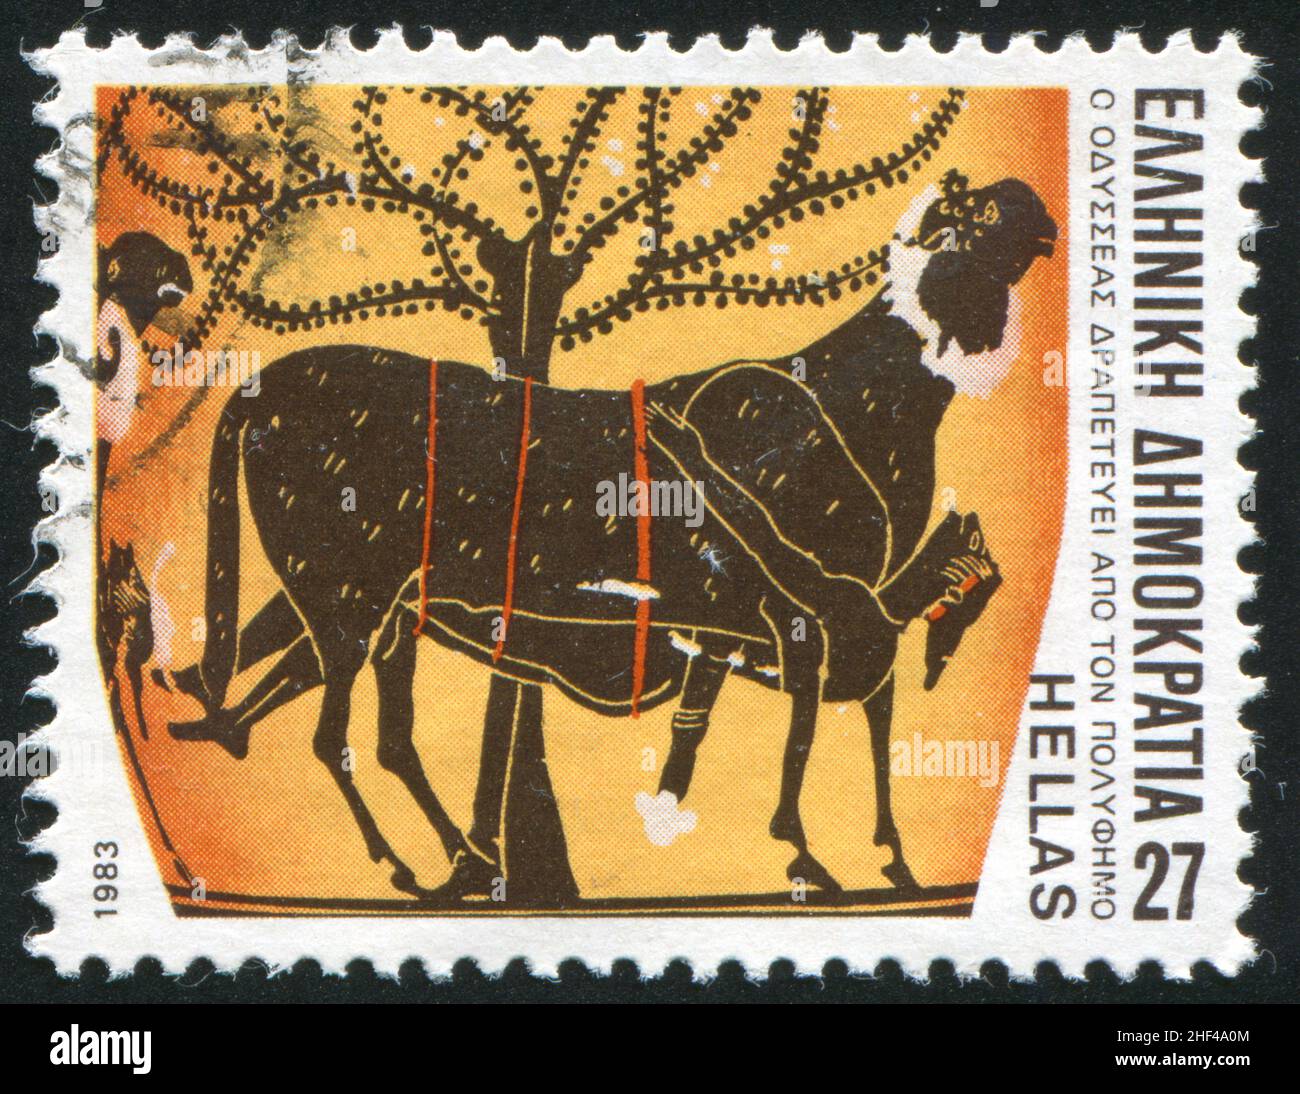 GREECE - CIRCA 1983: stamp printed by Greece, shows Ulysses escaping from cave of Polyphemus, circa 1983 Stock Photo